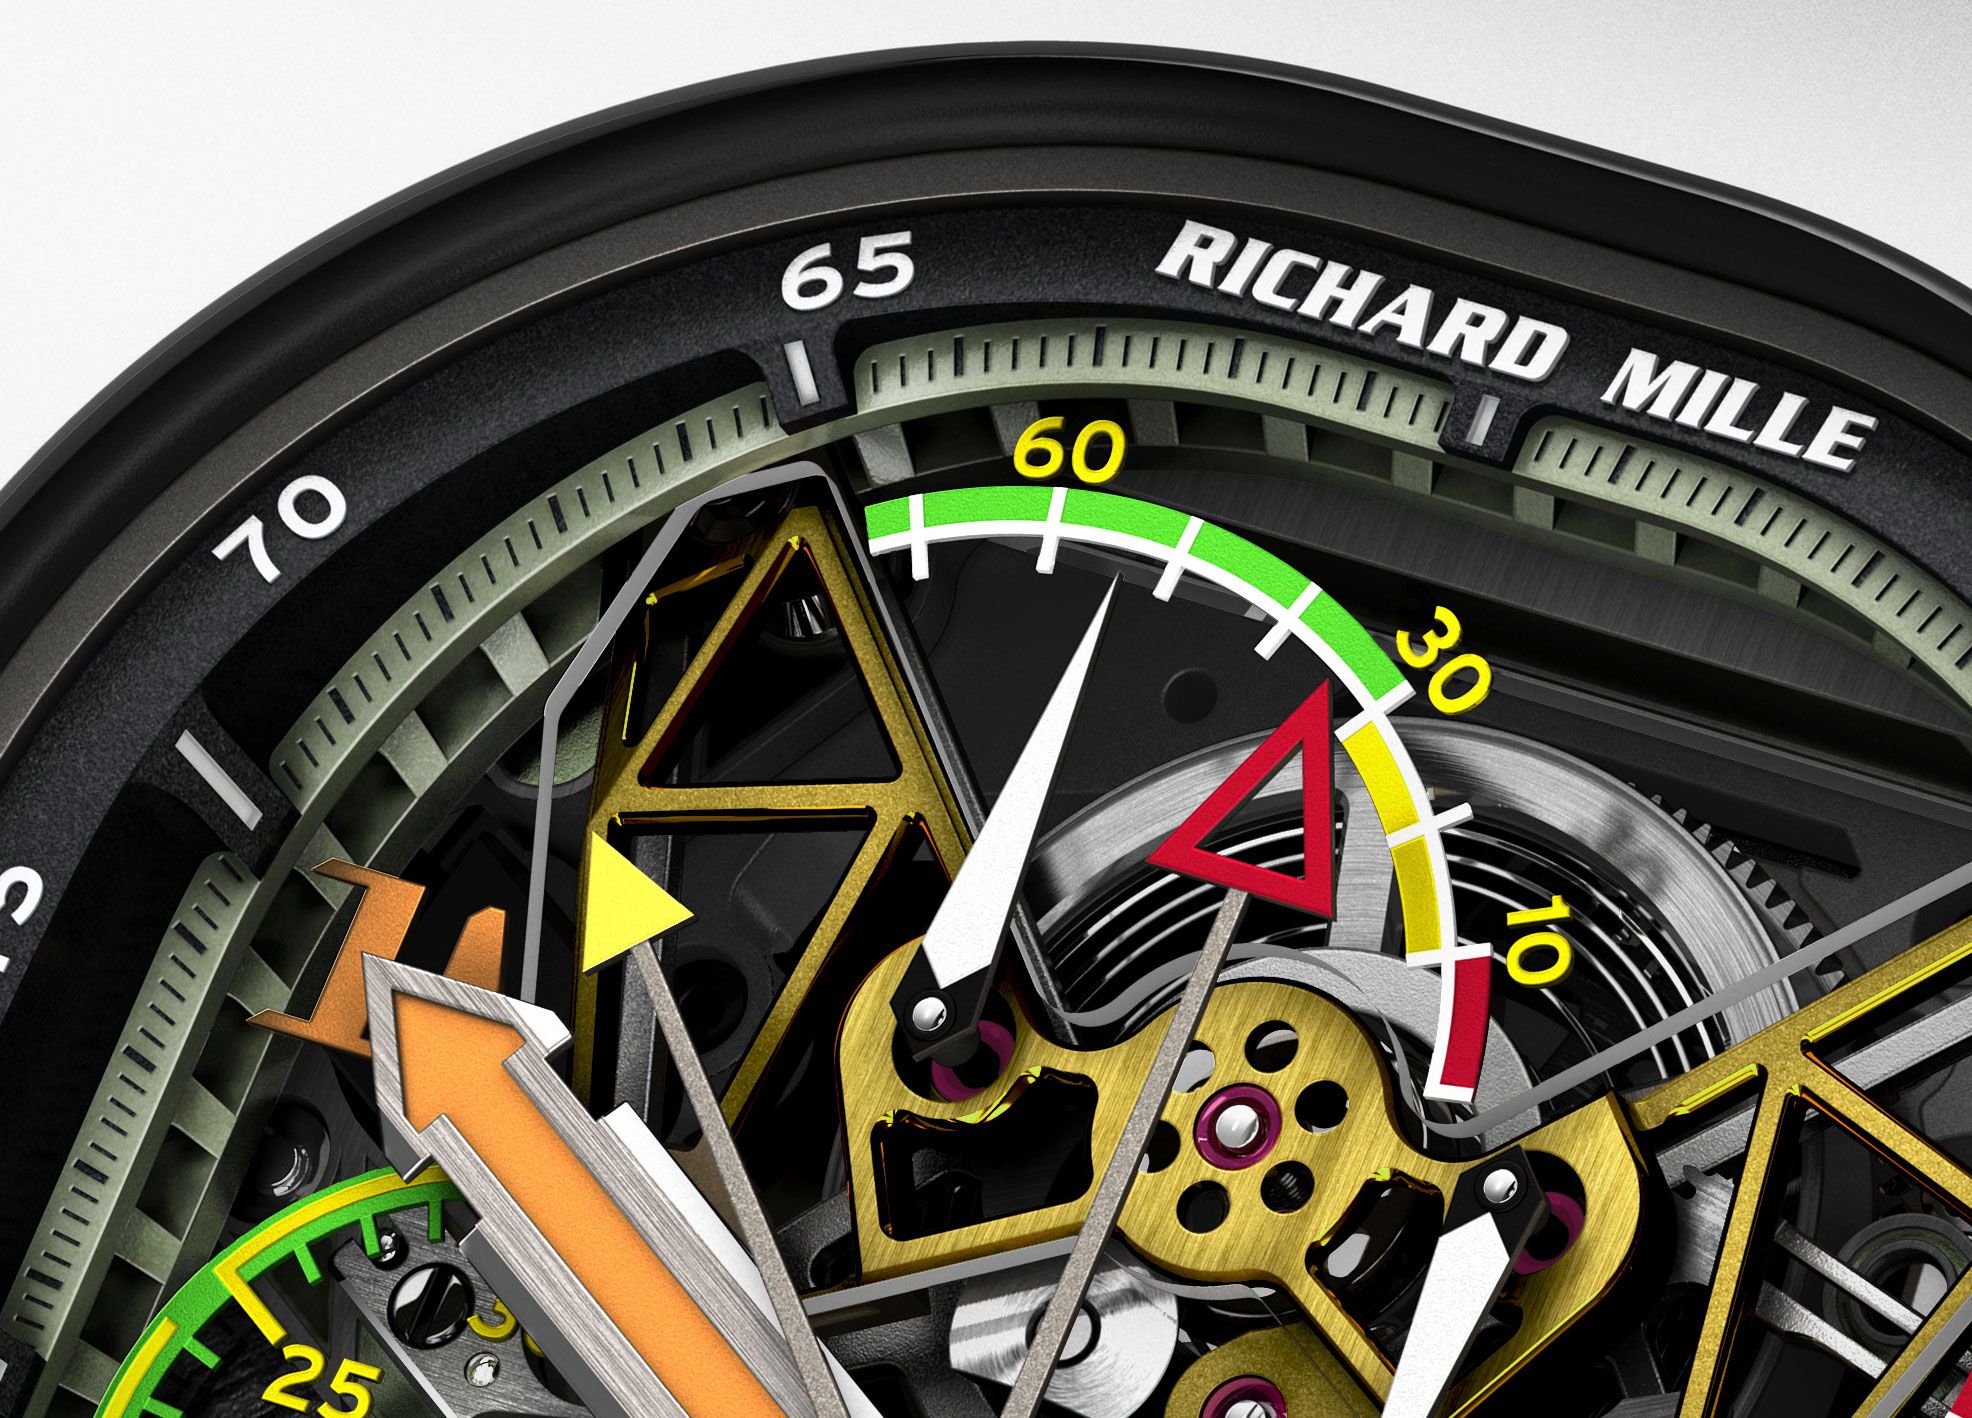 Richard Mille Reference Rm015 | A Platinum Skeletonized Dual Time Zone Tourbillon Wristwatch With Power Reserve And Torque Indication, Circa 2008 | 型###Richard Mille Rafael Nadal Signature Black Carbon Watch RM35-01